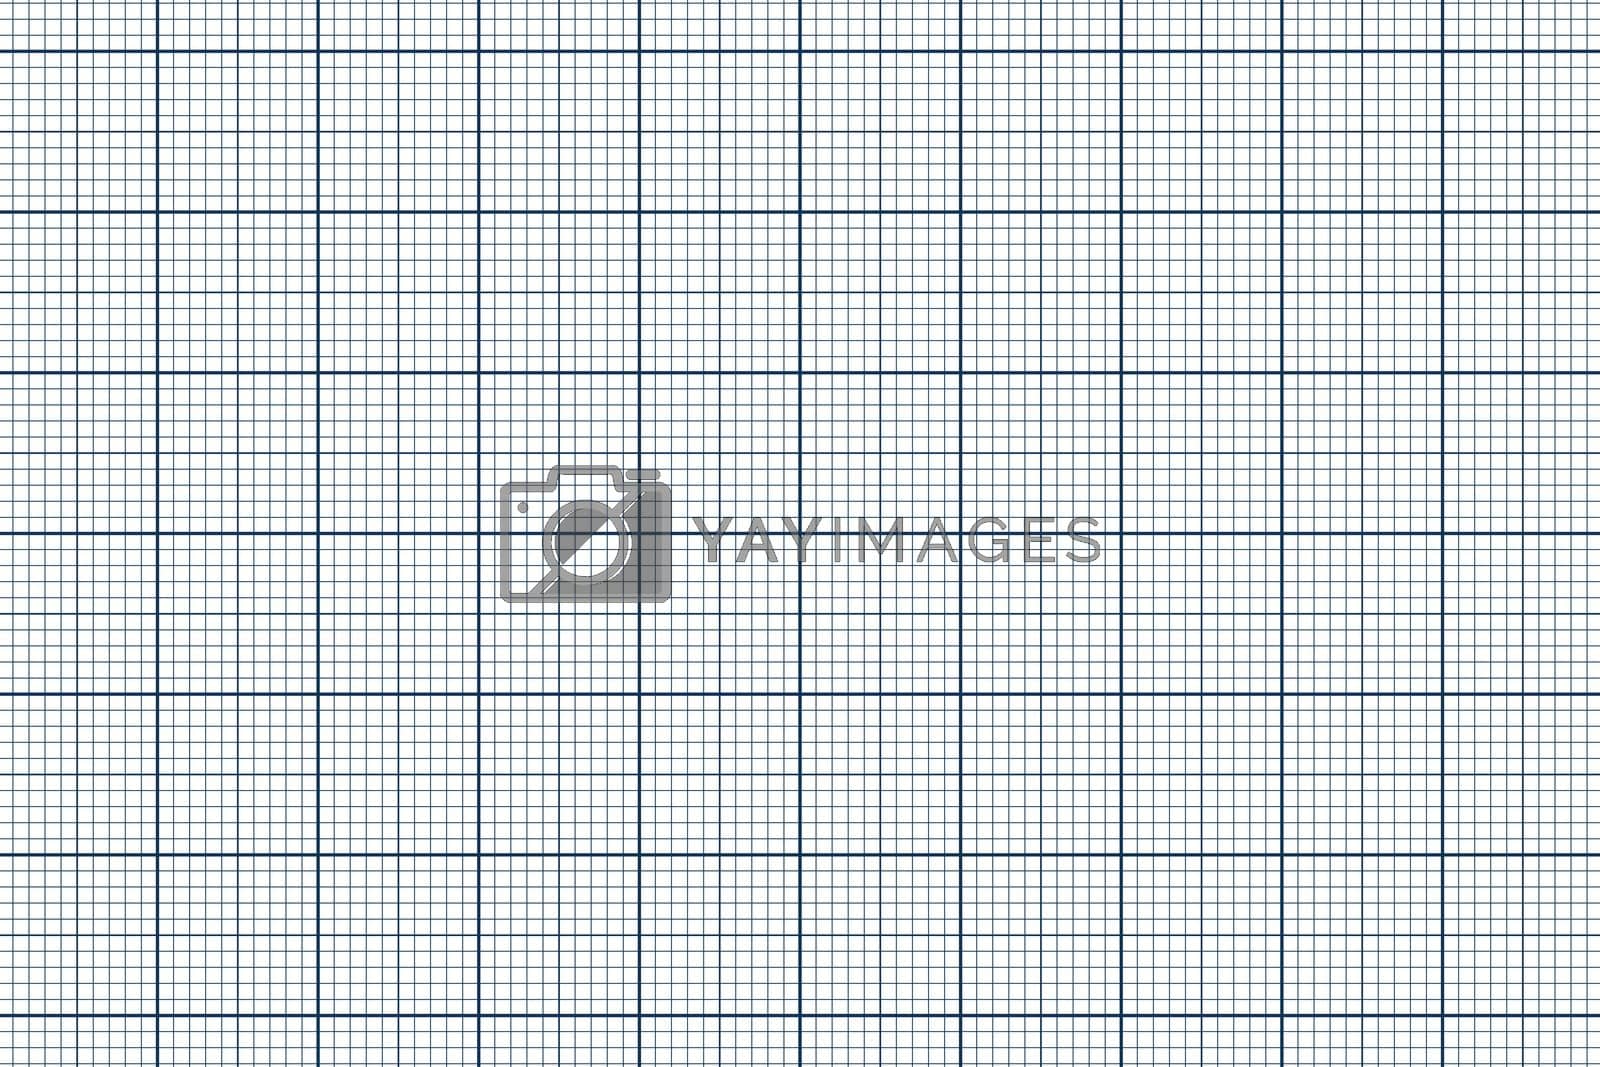 Royalty free image of Millimeter graph paper grid. Abstract squared background. Geometric pattern for school, technical engineering line scale measurement. Lined blank for education isolated on transparent background by allaku